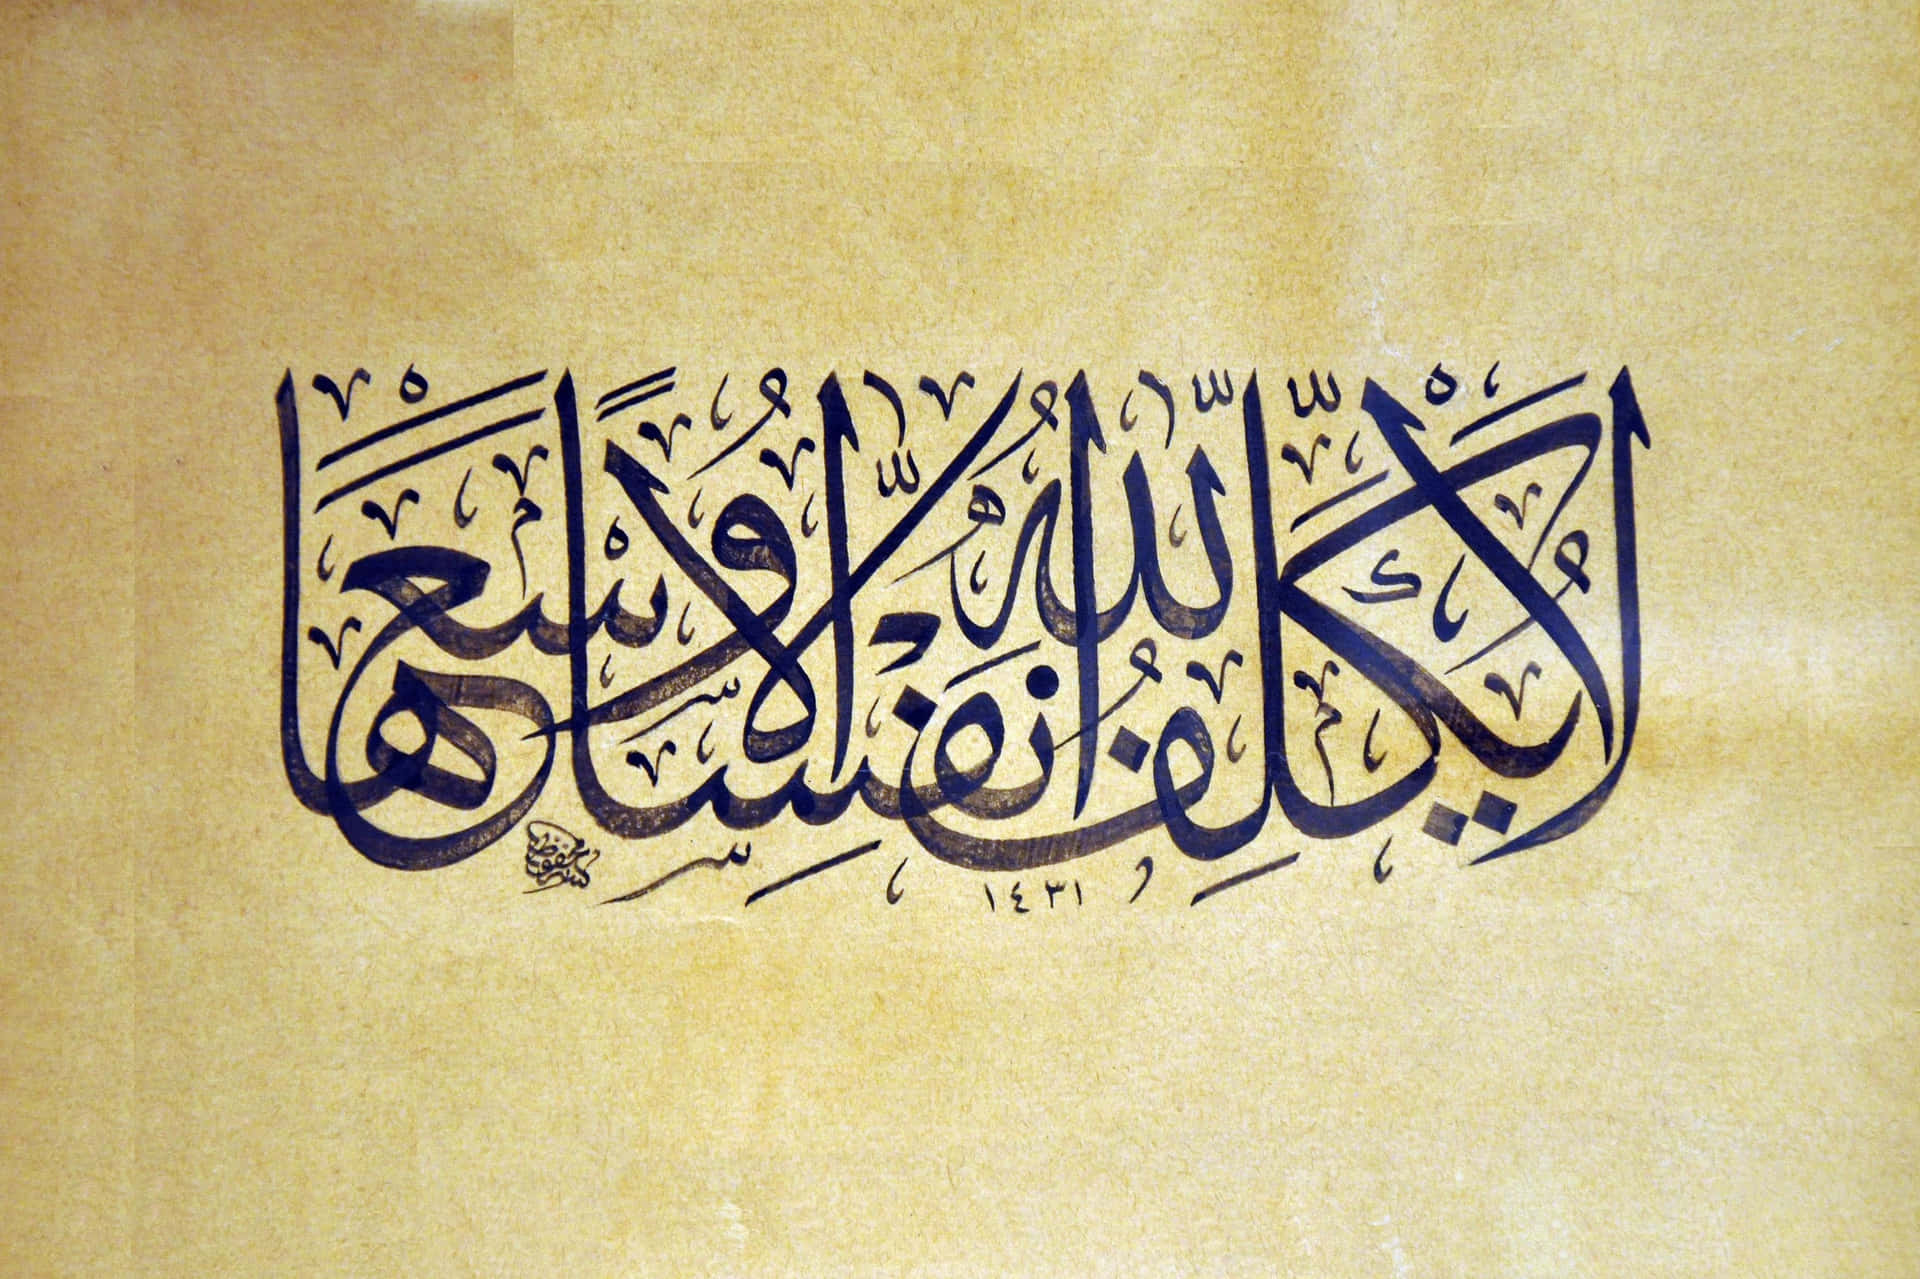 An Inspirational Quote in Arabic Script